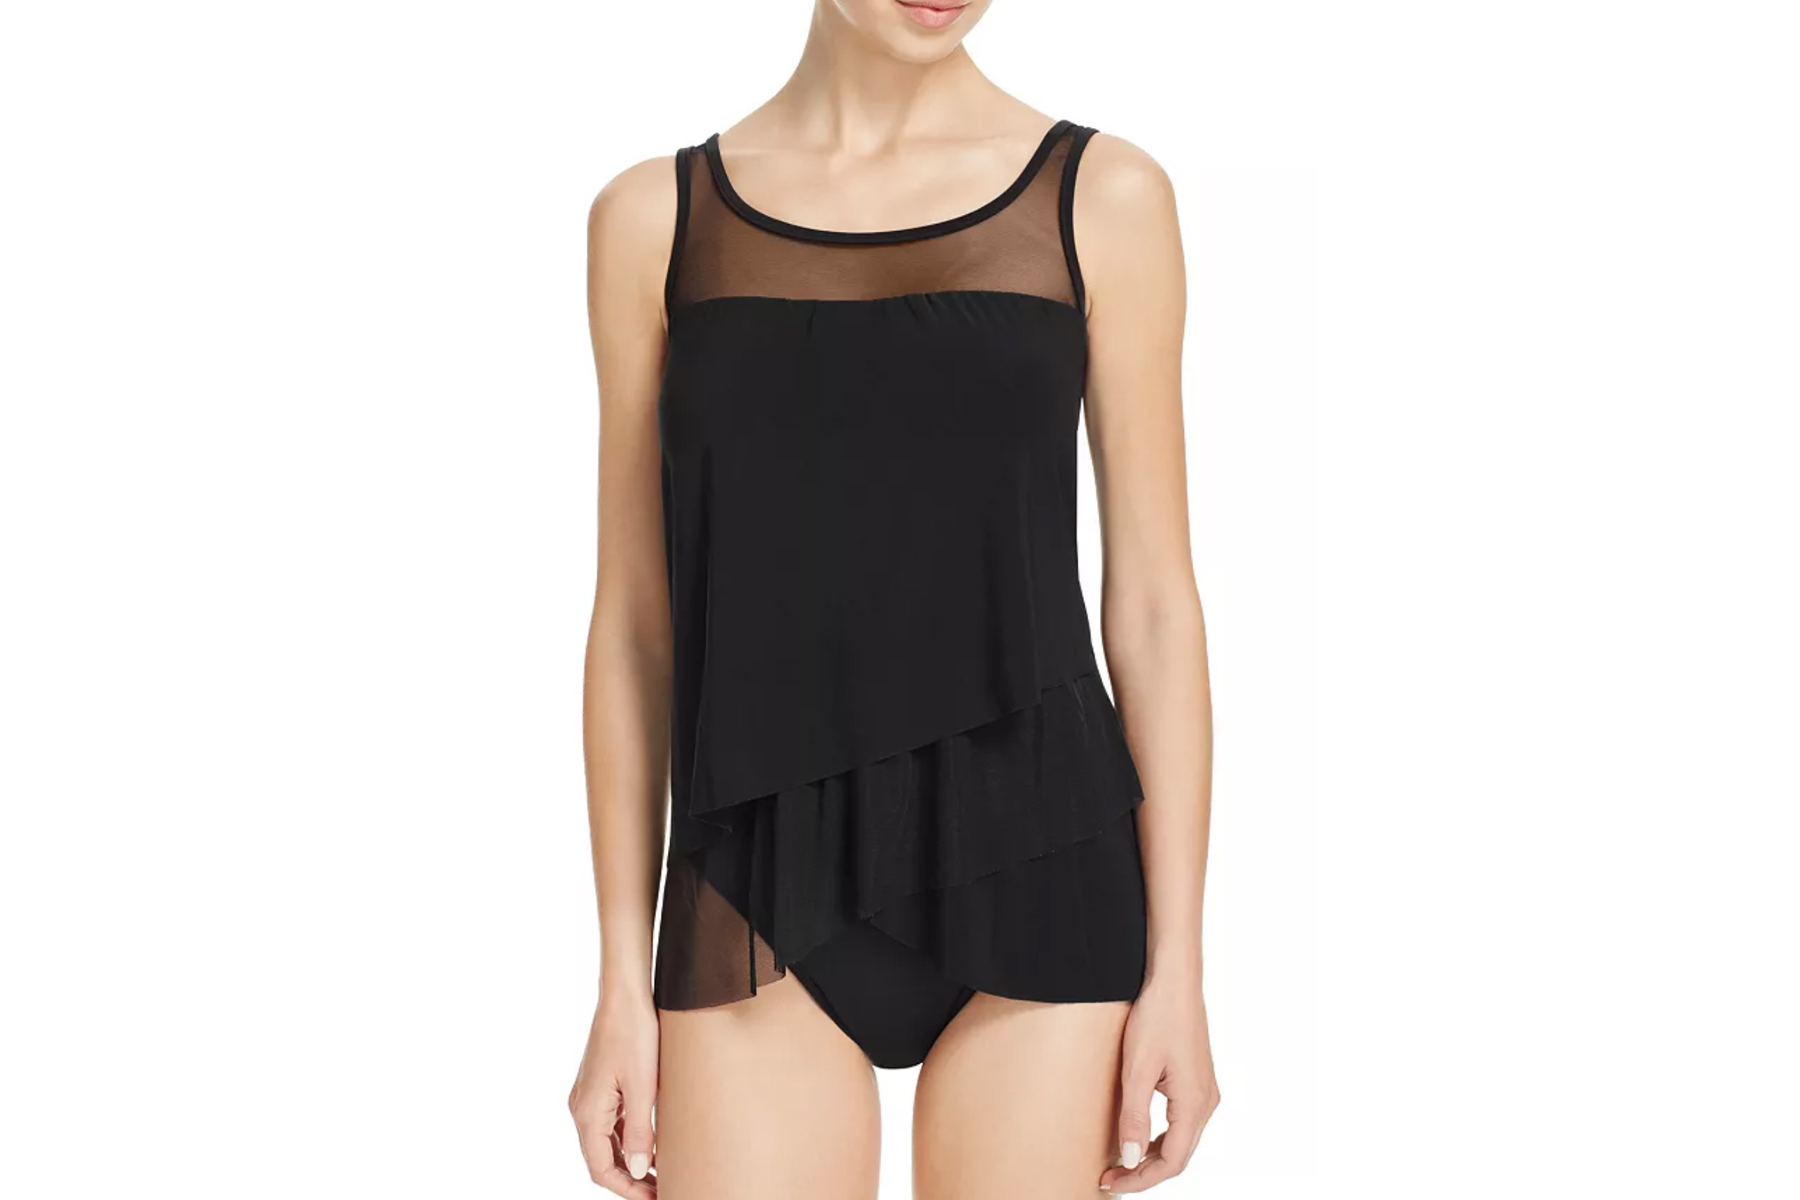 13 Best Shapewear Swimsuits and Miraclesuit Swimwear